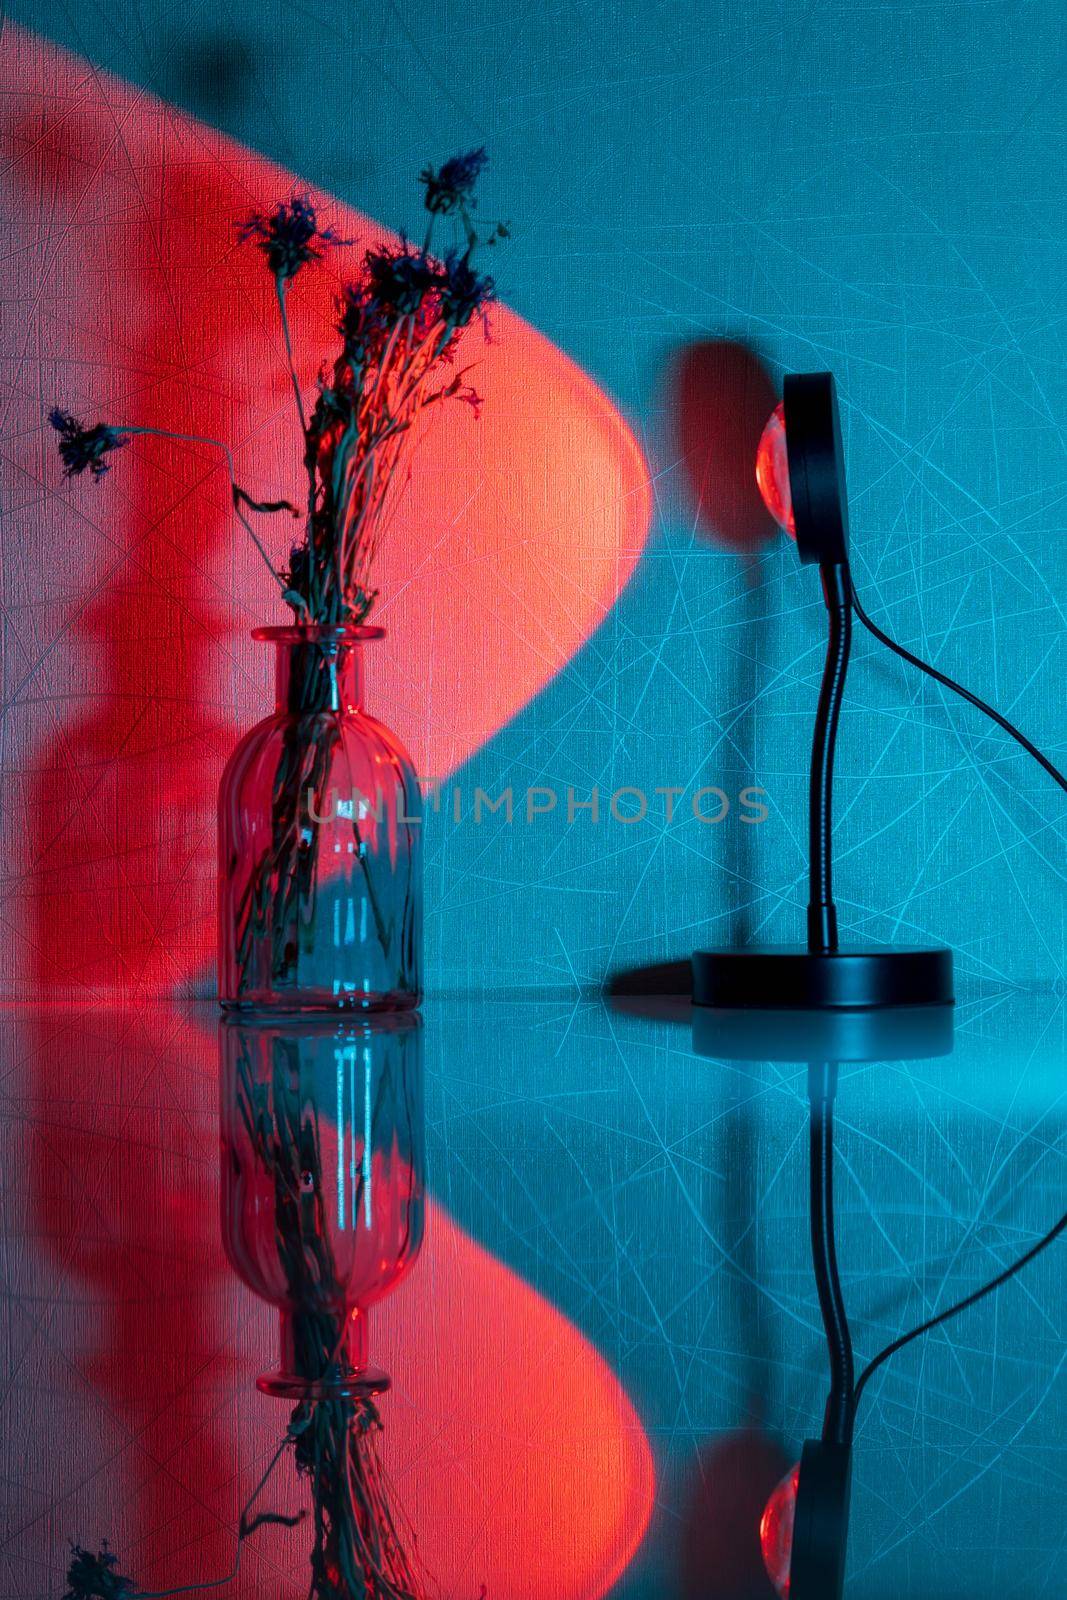 Sunset projector lamp on the table. Multi colored RGB light. Home decor. Selective focus